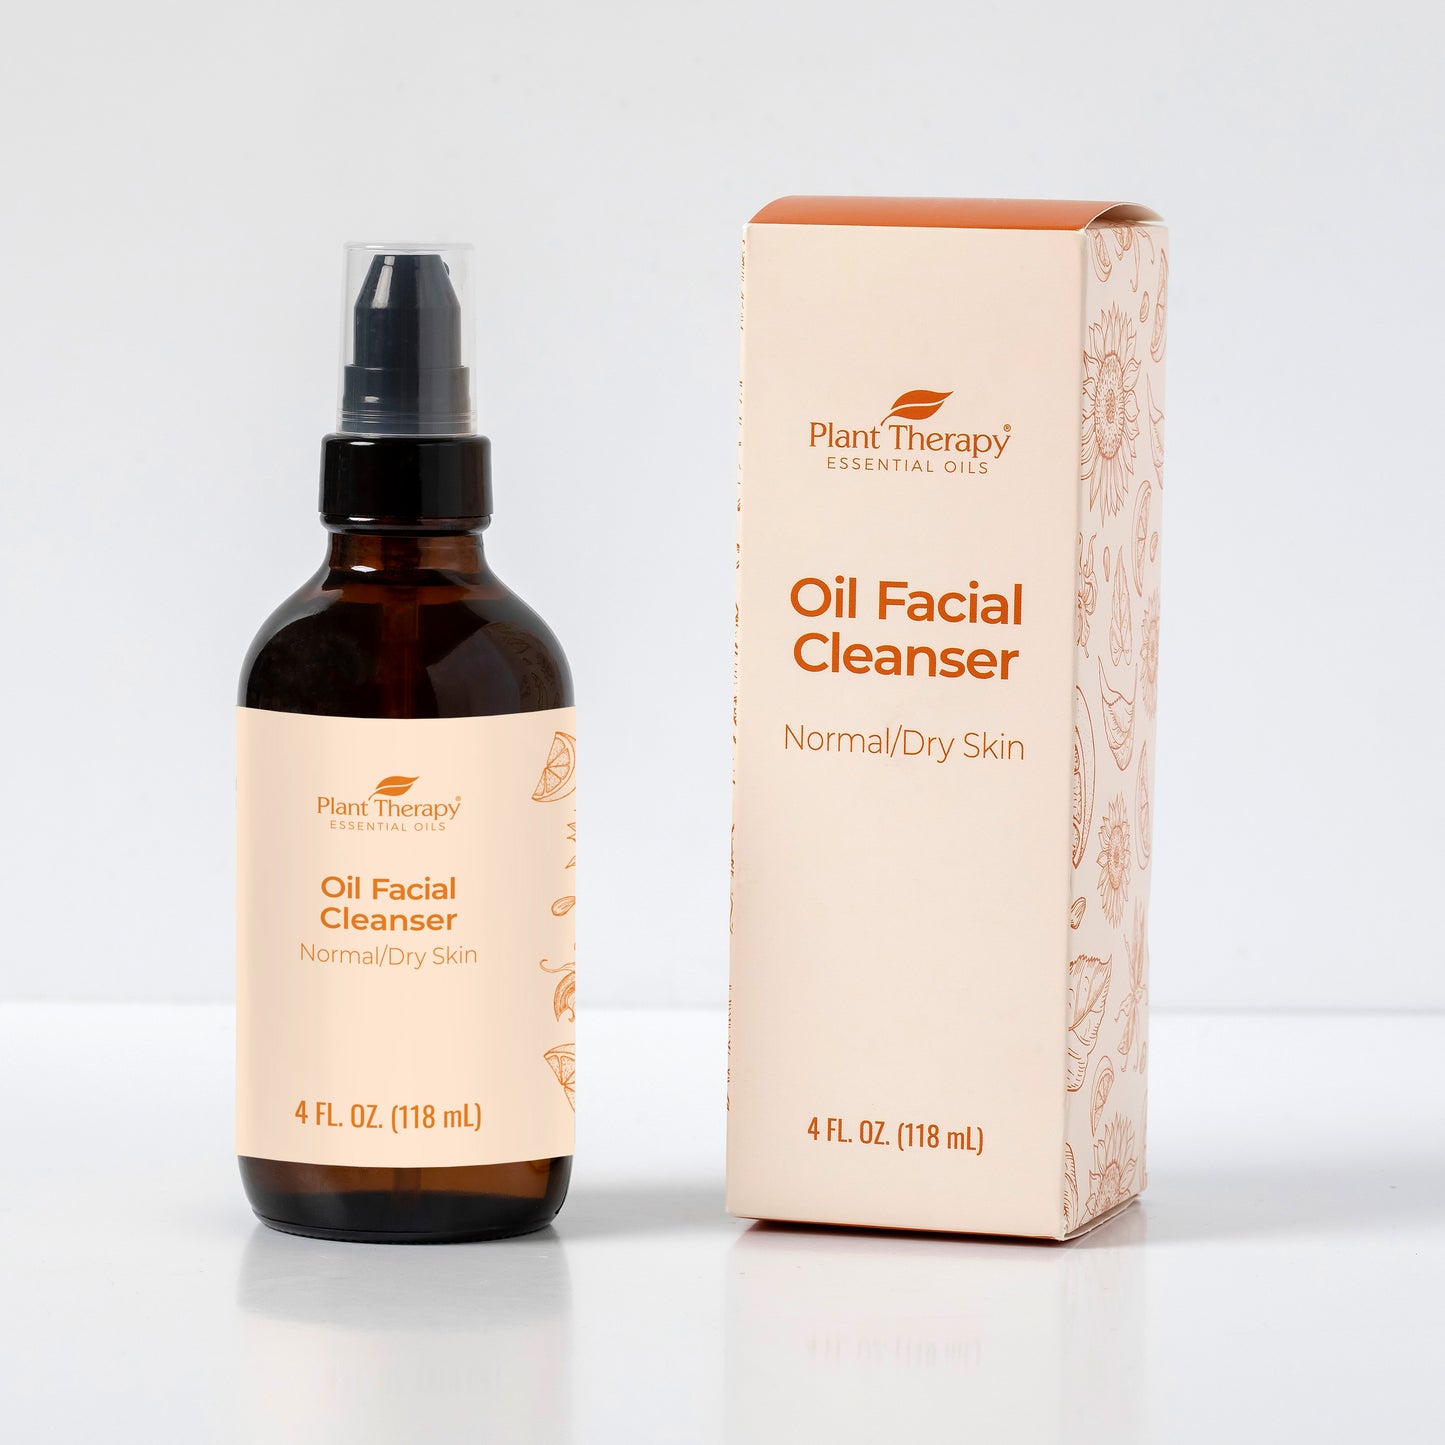 Oil Facial Cleanser for Normal/Dry Skin